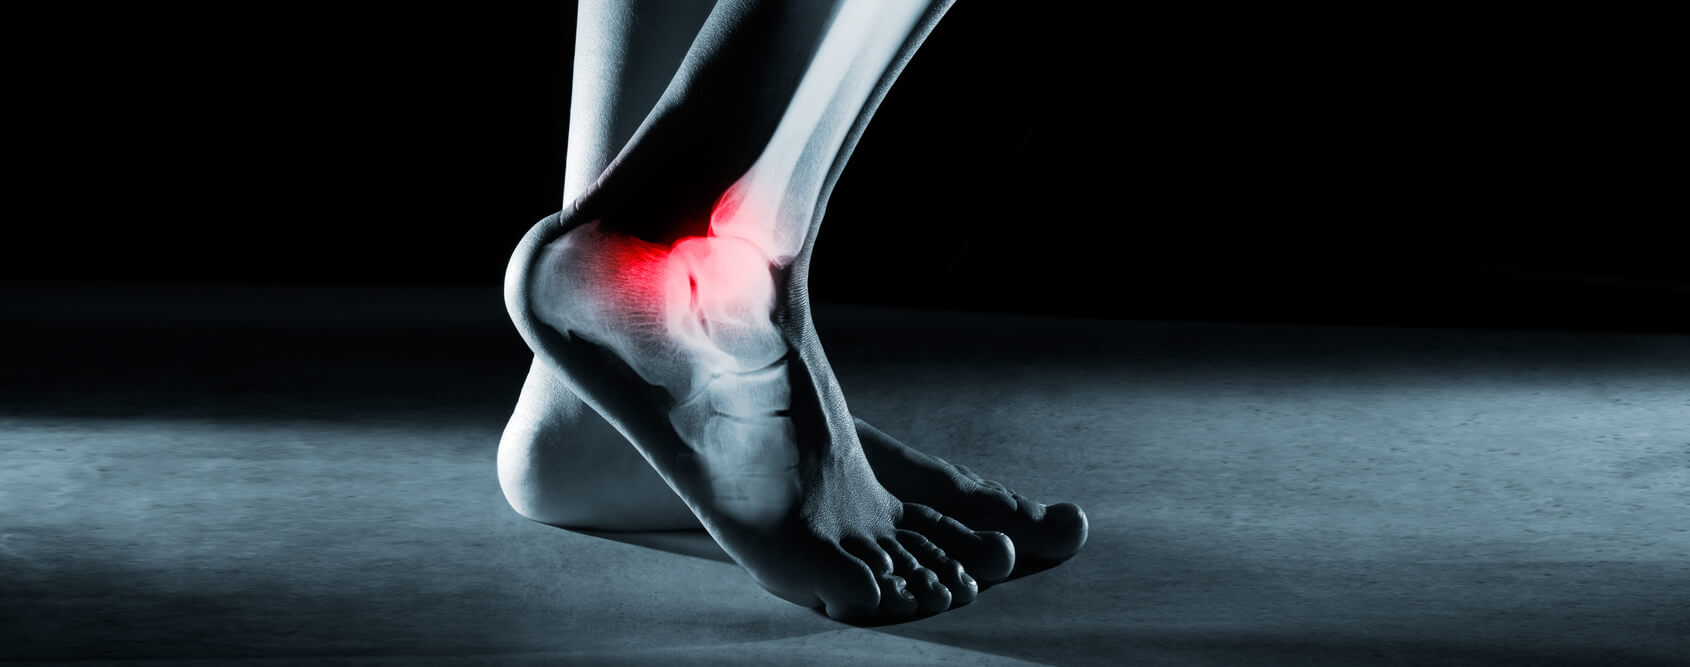 Podiatry Clinic Podiatrist Northcote - Ankle and Foot Pain Centre Northcote